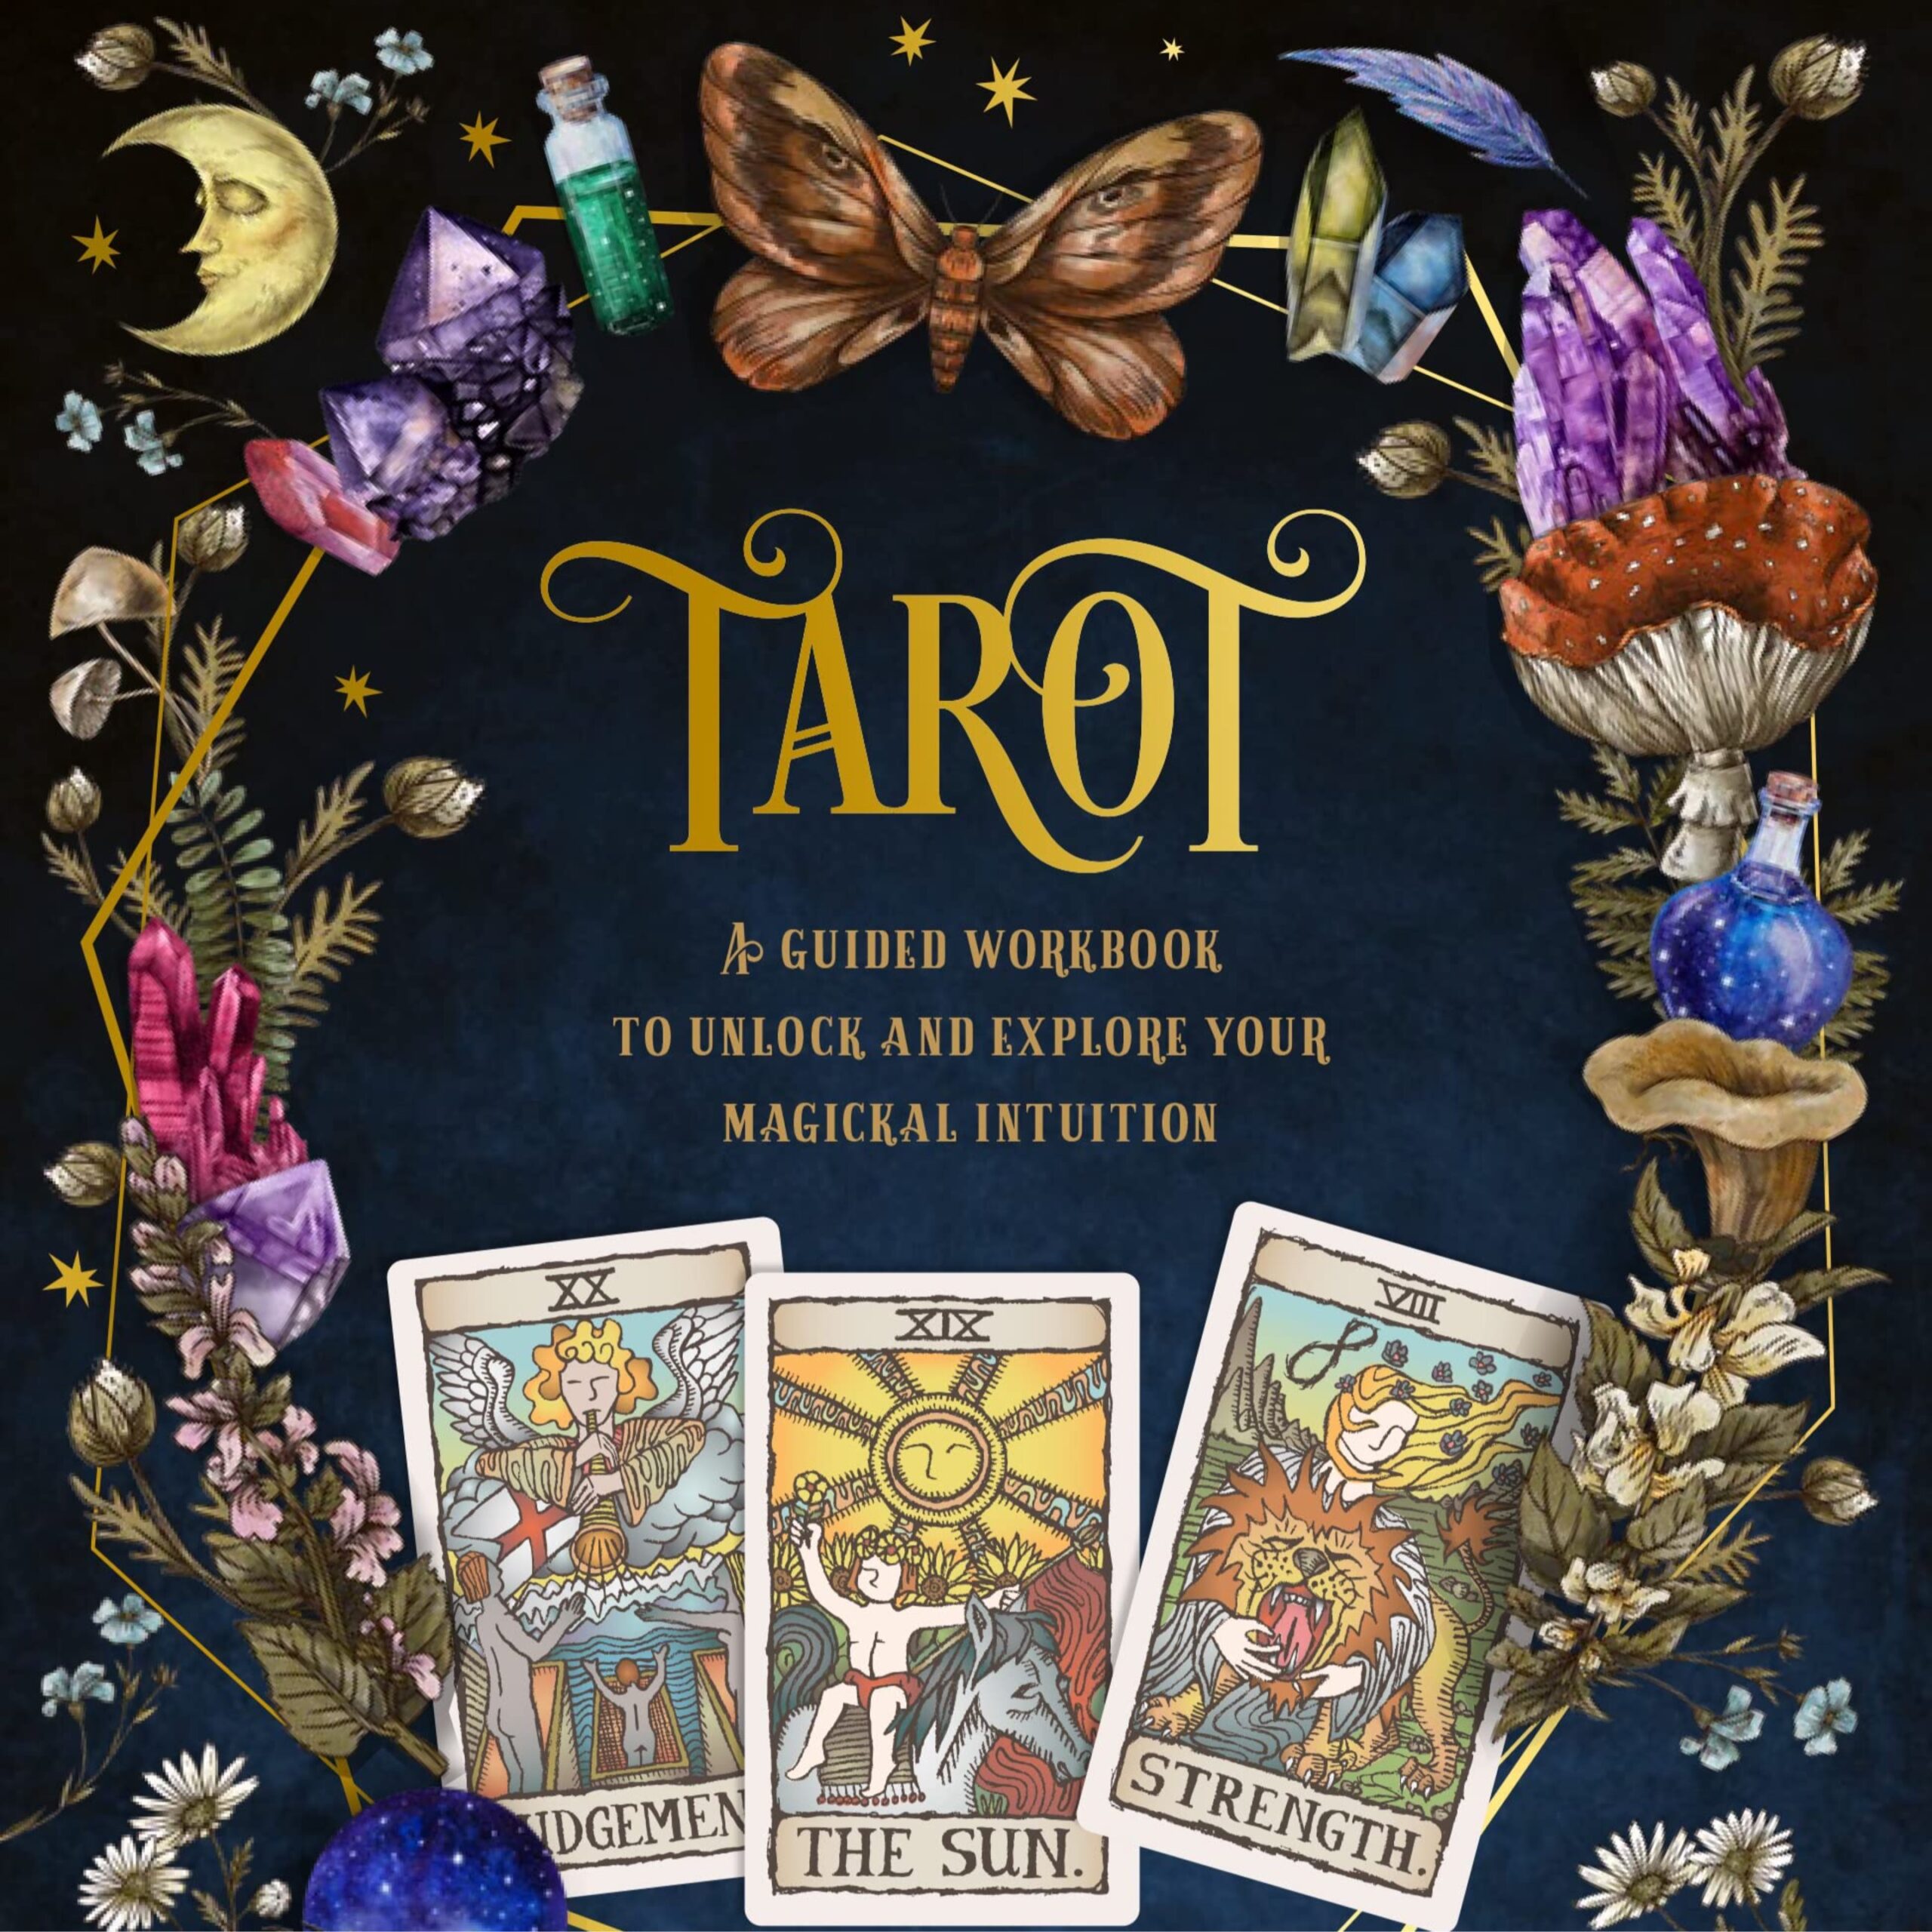 Tarot - a guided workbook to unlock and explore your magical intuition